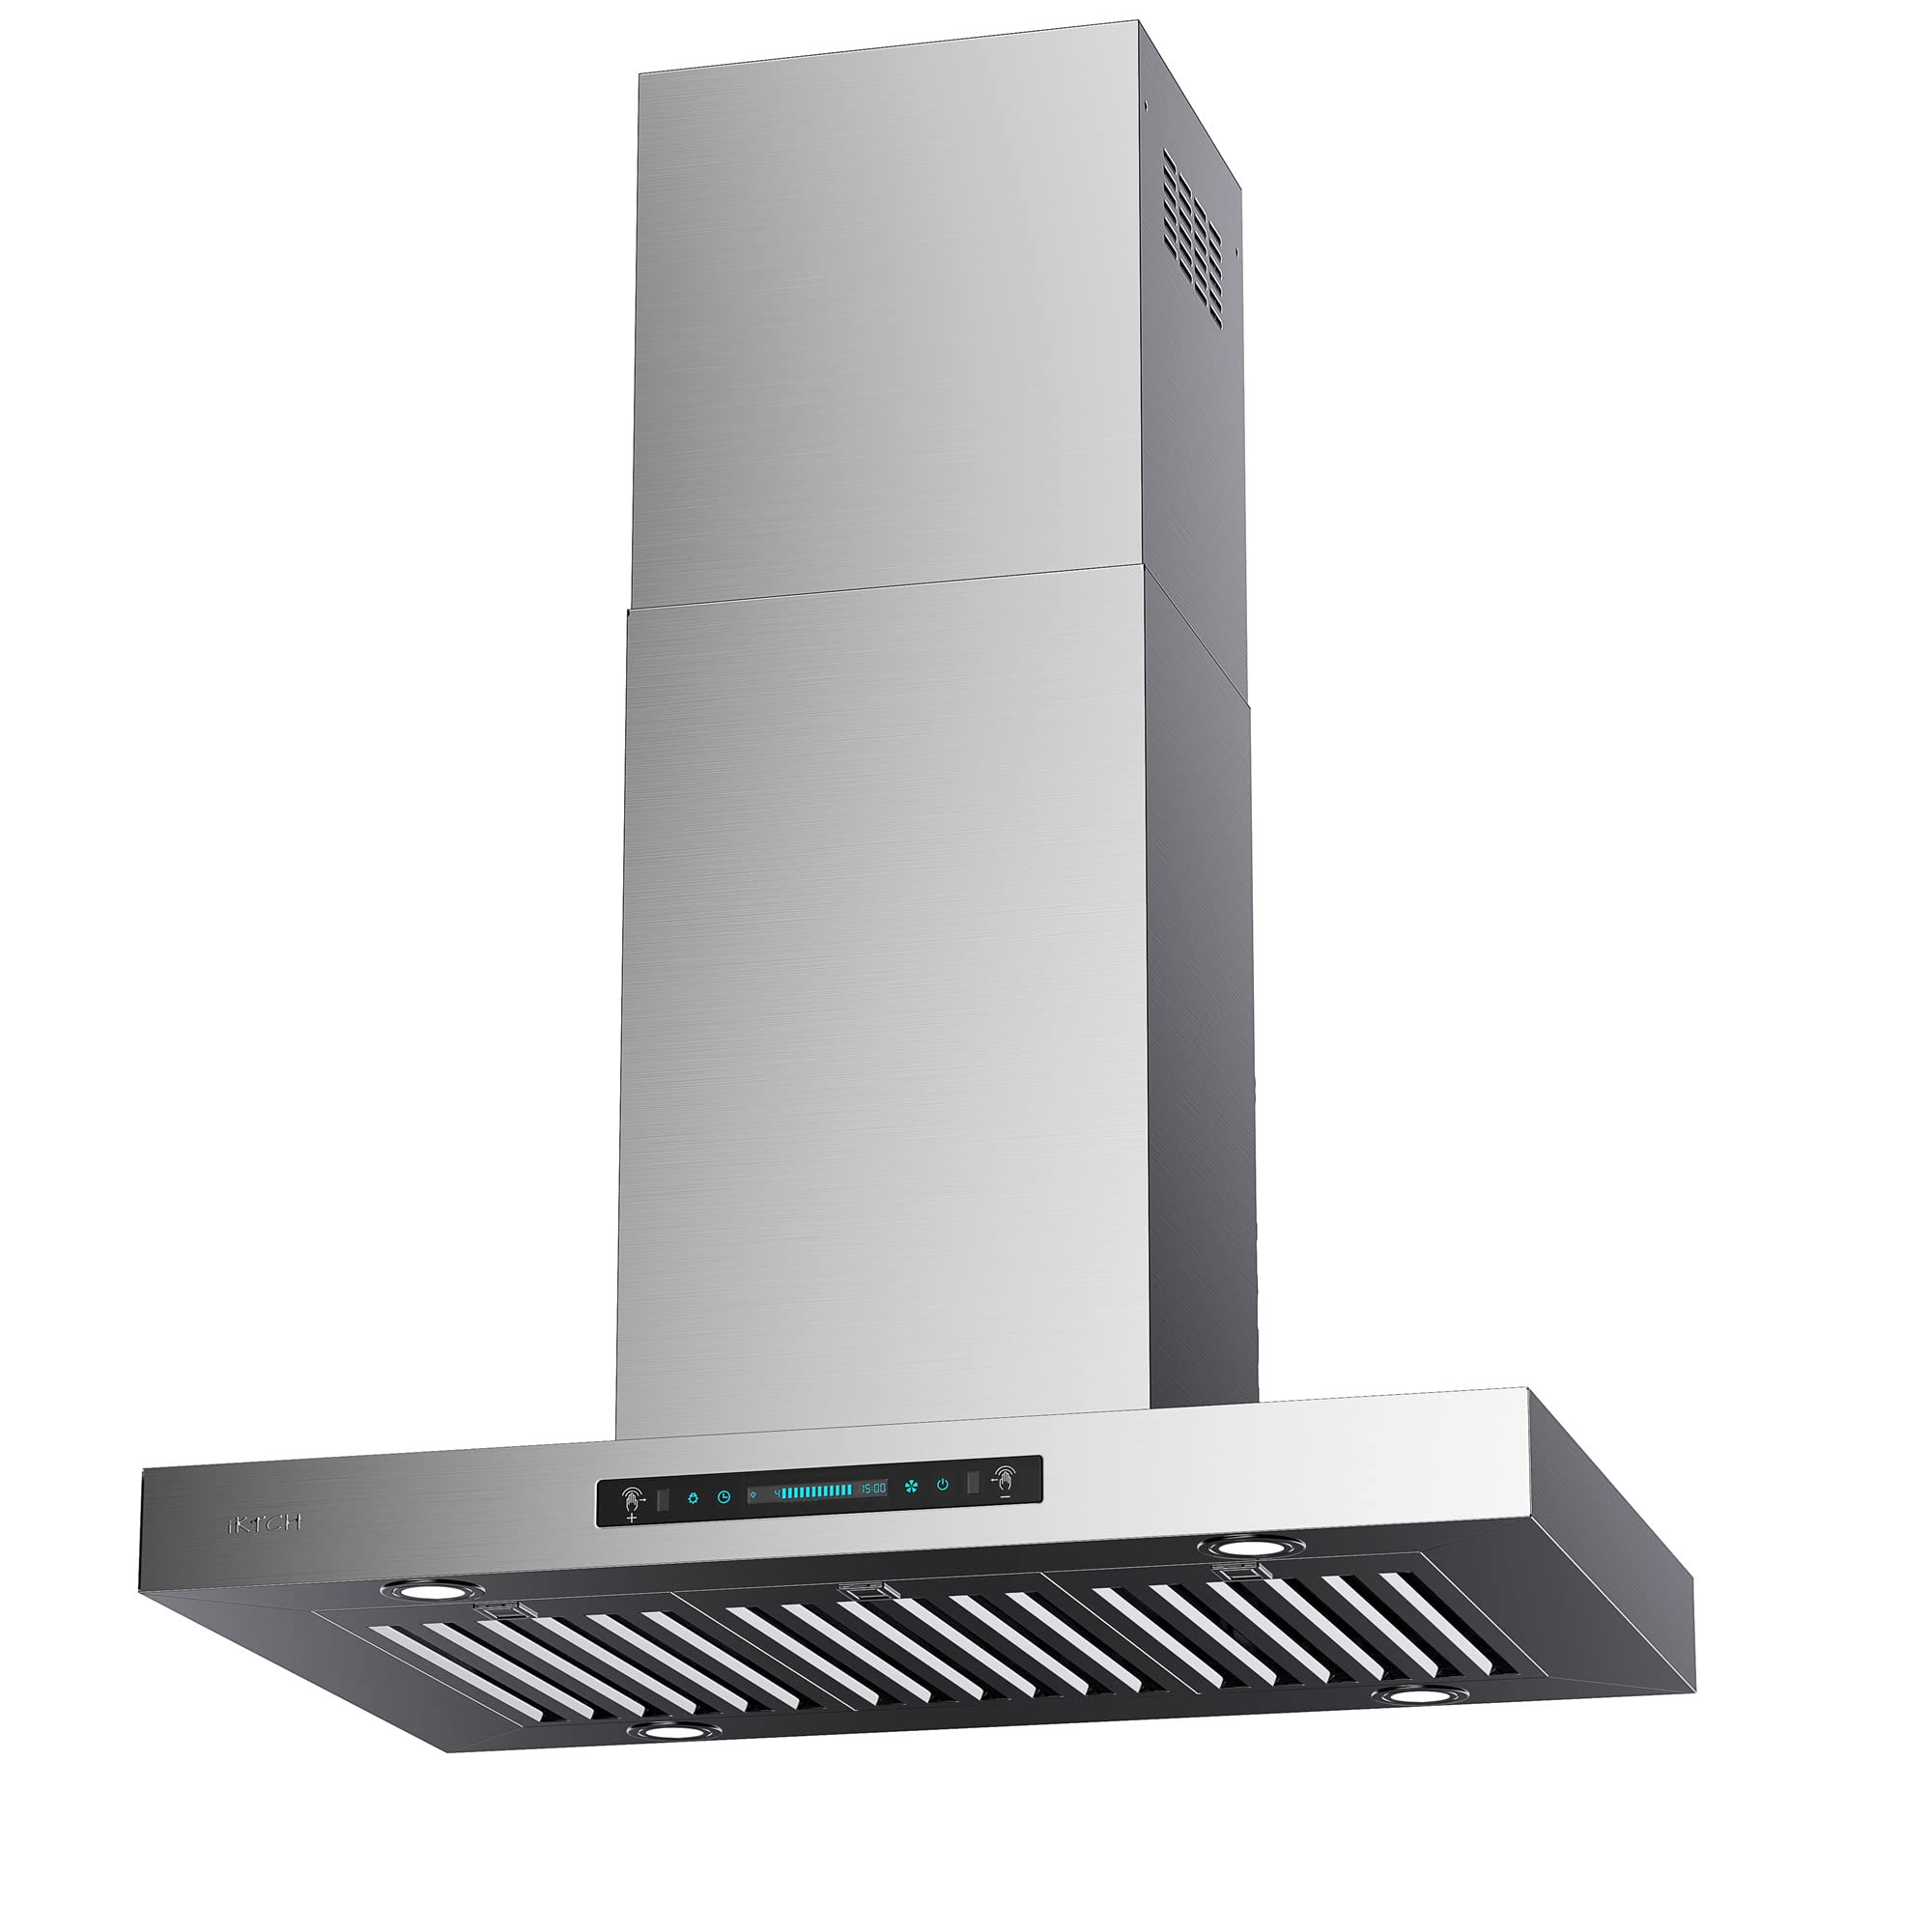 IKTCH 28 in. 900 CFM Ducted Insert with LED 4 Speed Gesture Sensing and Touch Control Panel Range Hood in Stainless Steel